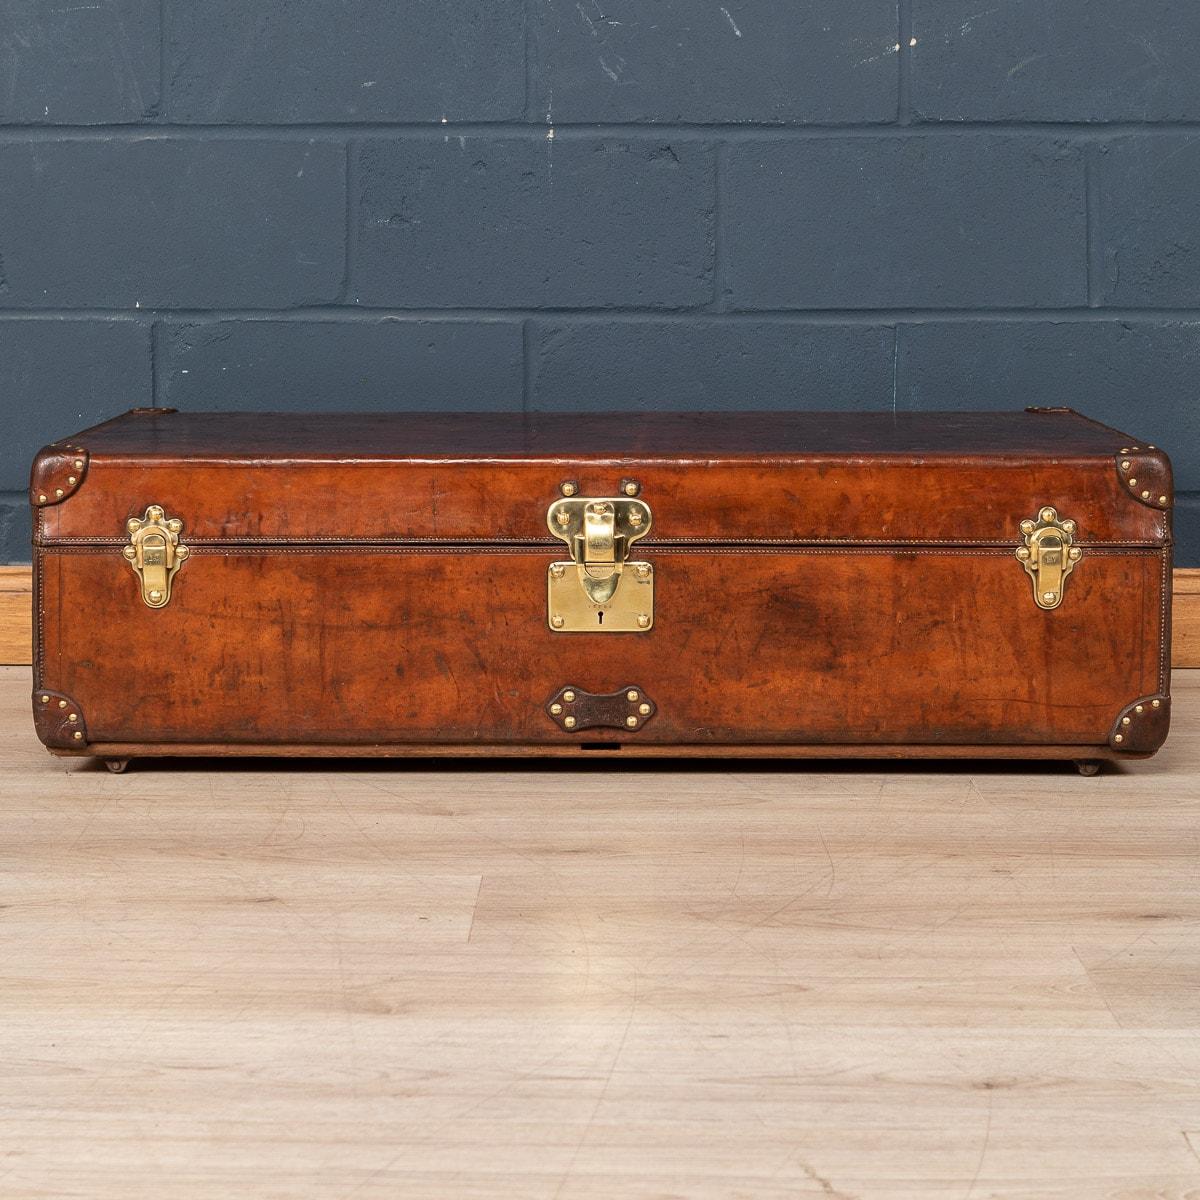 A rare Louis Vuitton cabin trunk covered in leather. Dating to the early part of the 20th century, covered not in the world famous (but more common) monogram canvas but in a single piece of cow hide. These all-leather trunks were made by special